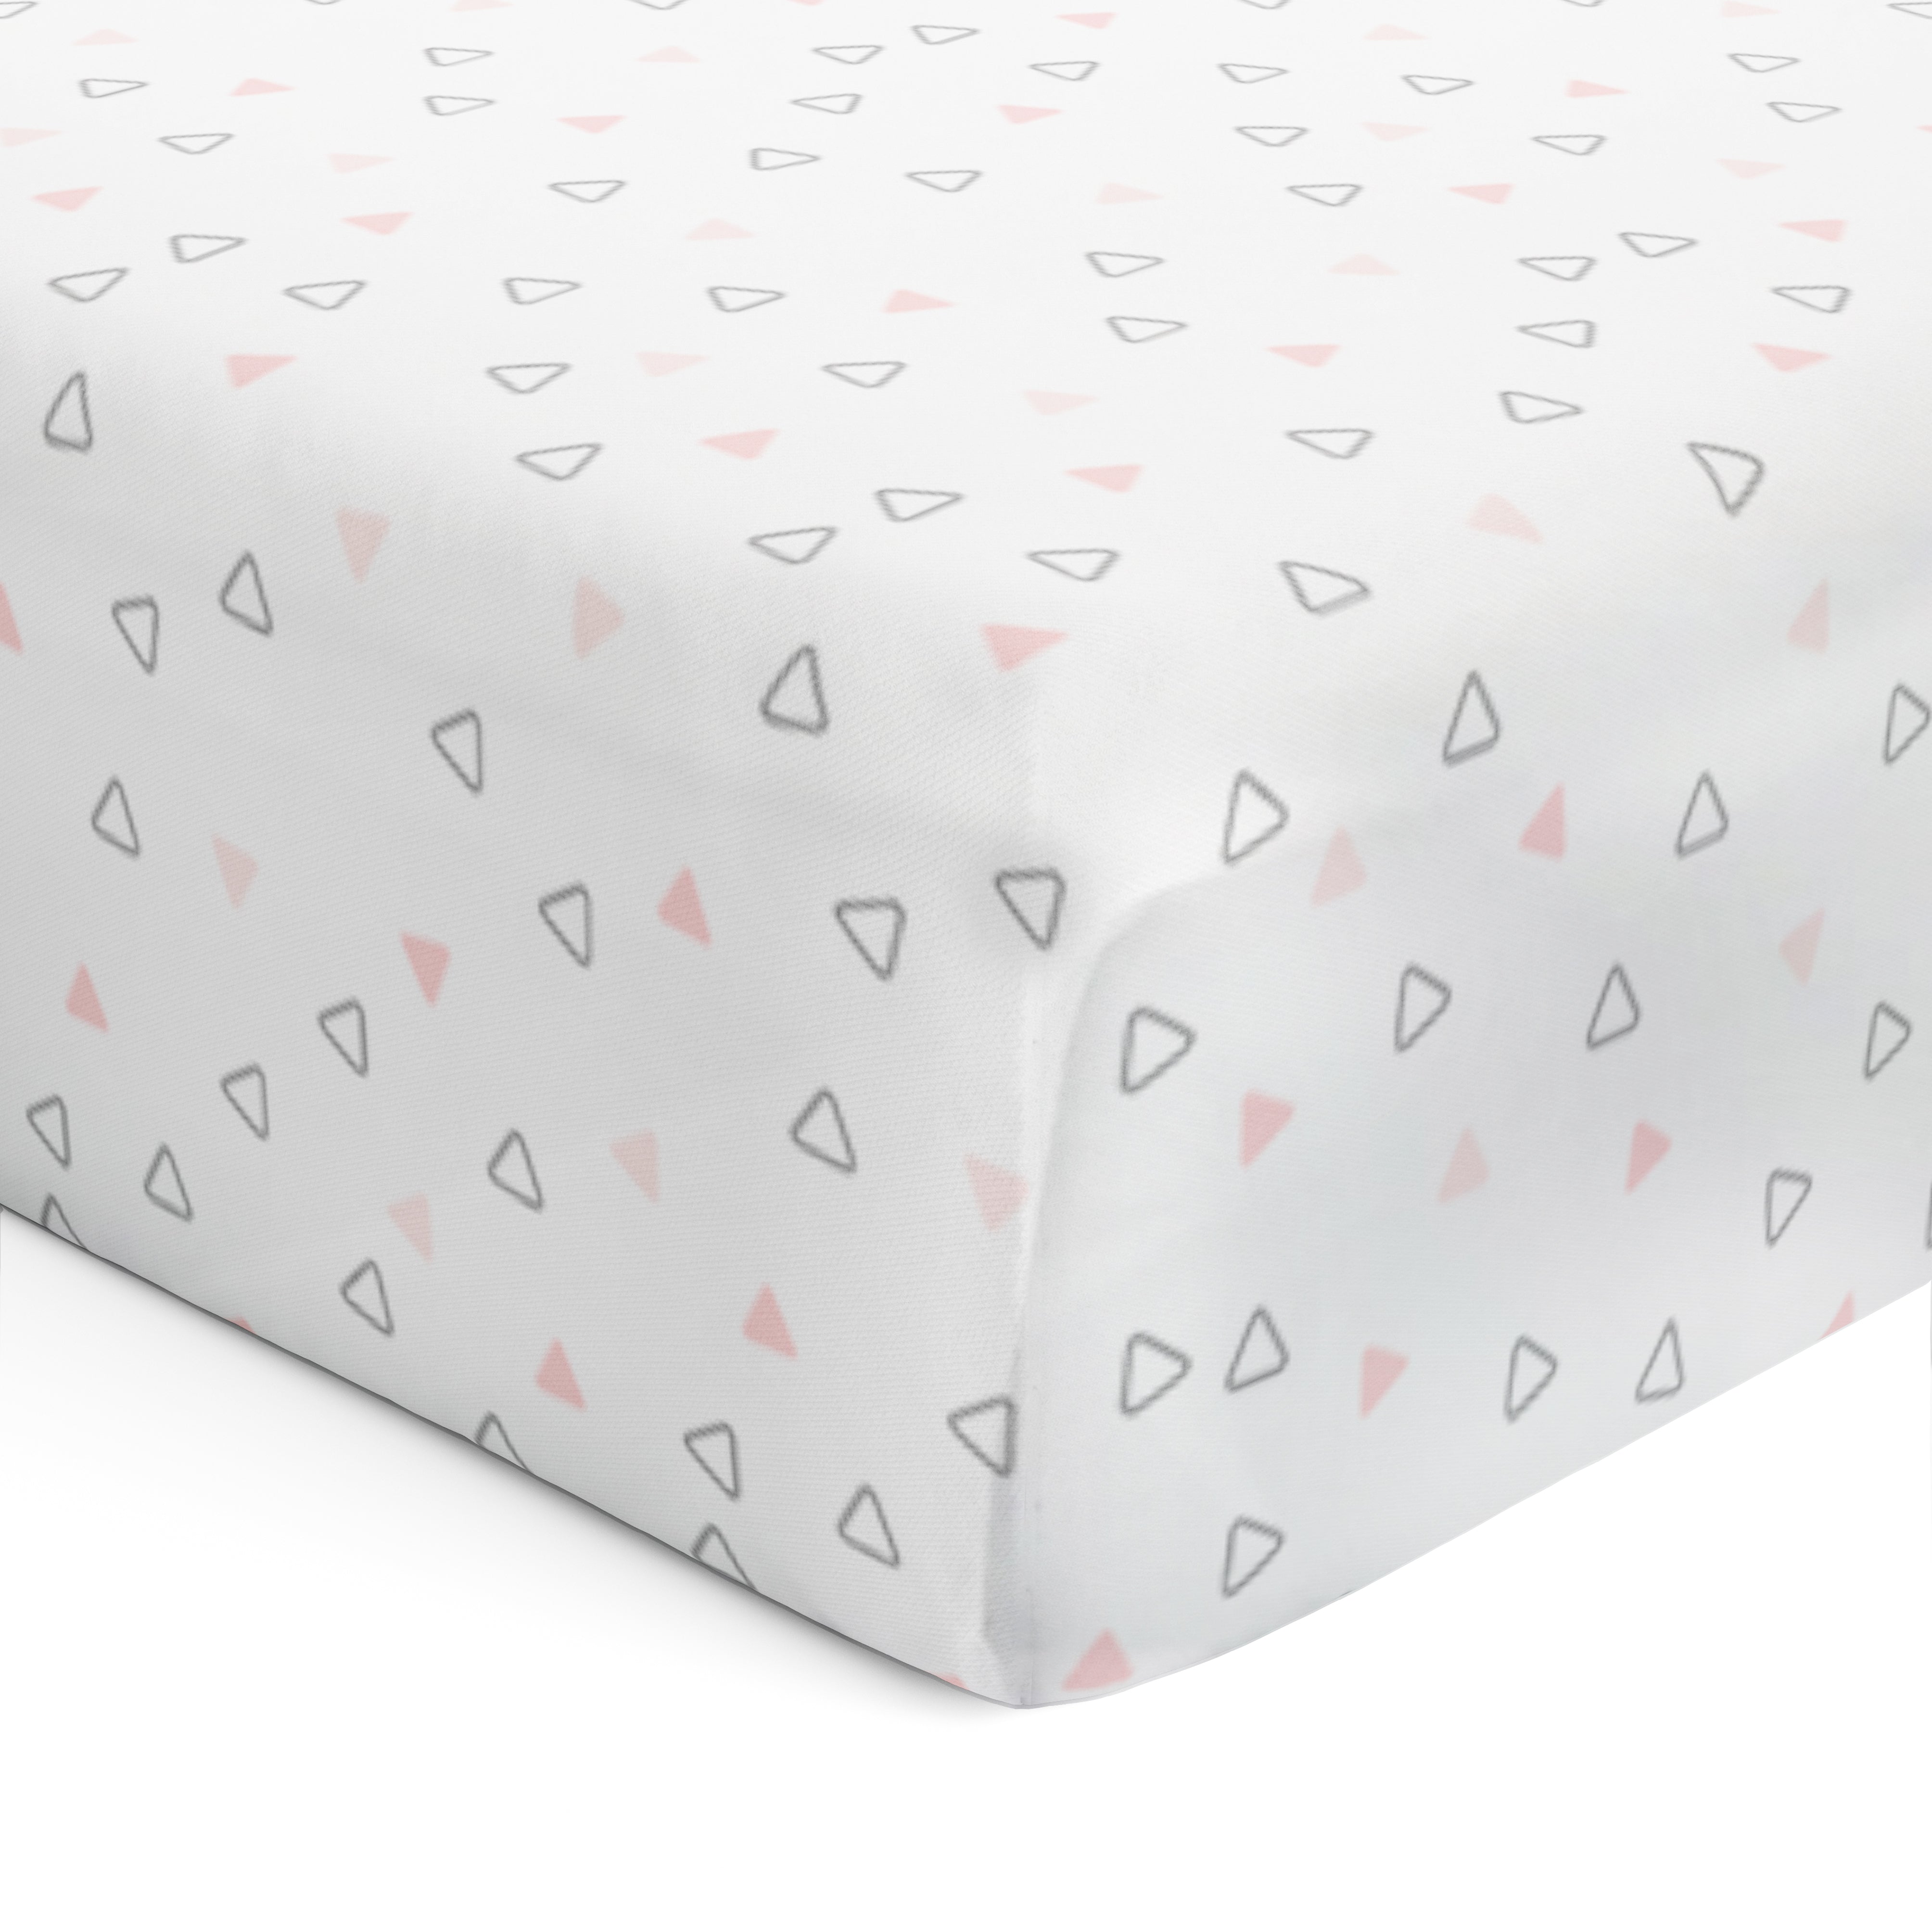 The White Cradle Flat Bed Sheet for Baby Cot & Mattress (2 pcs pack) - Pink Whale and Triangle